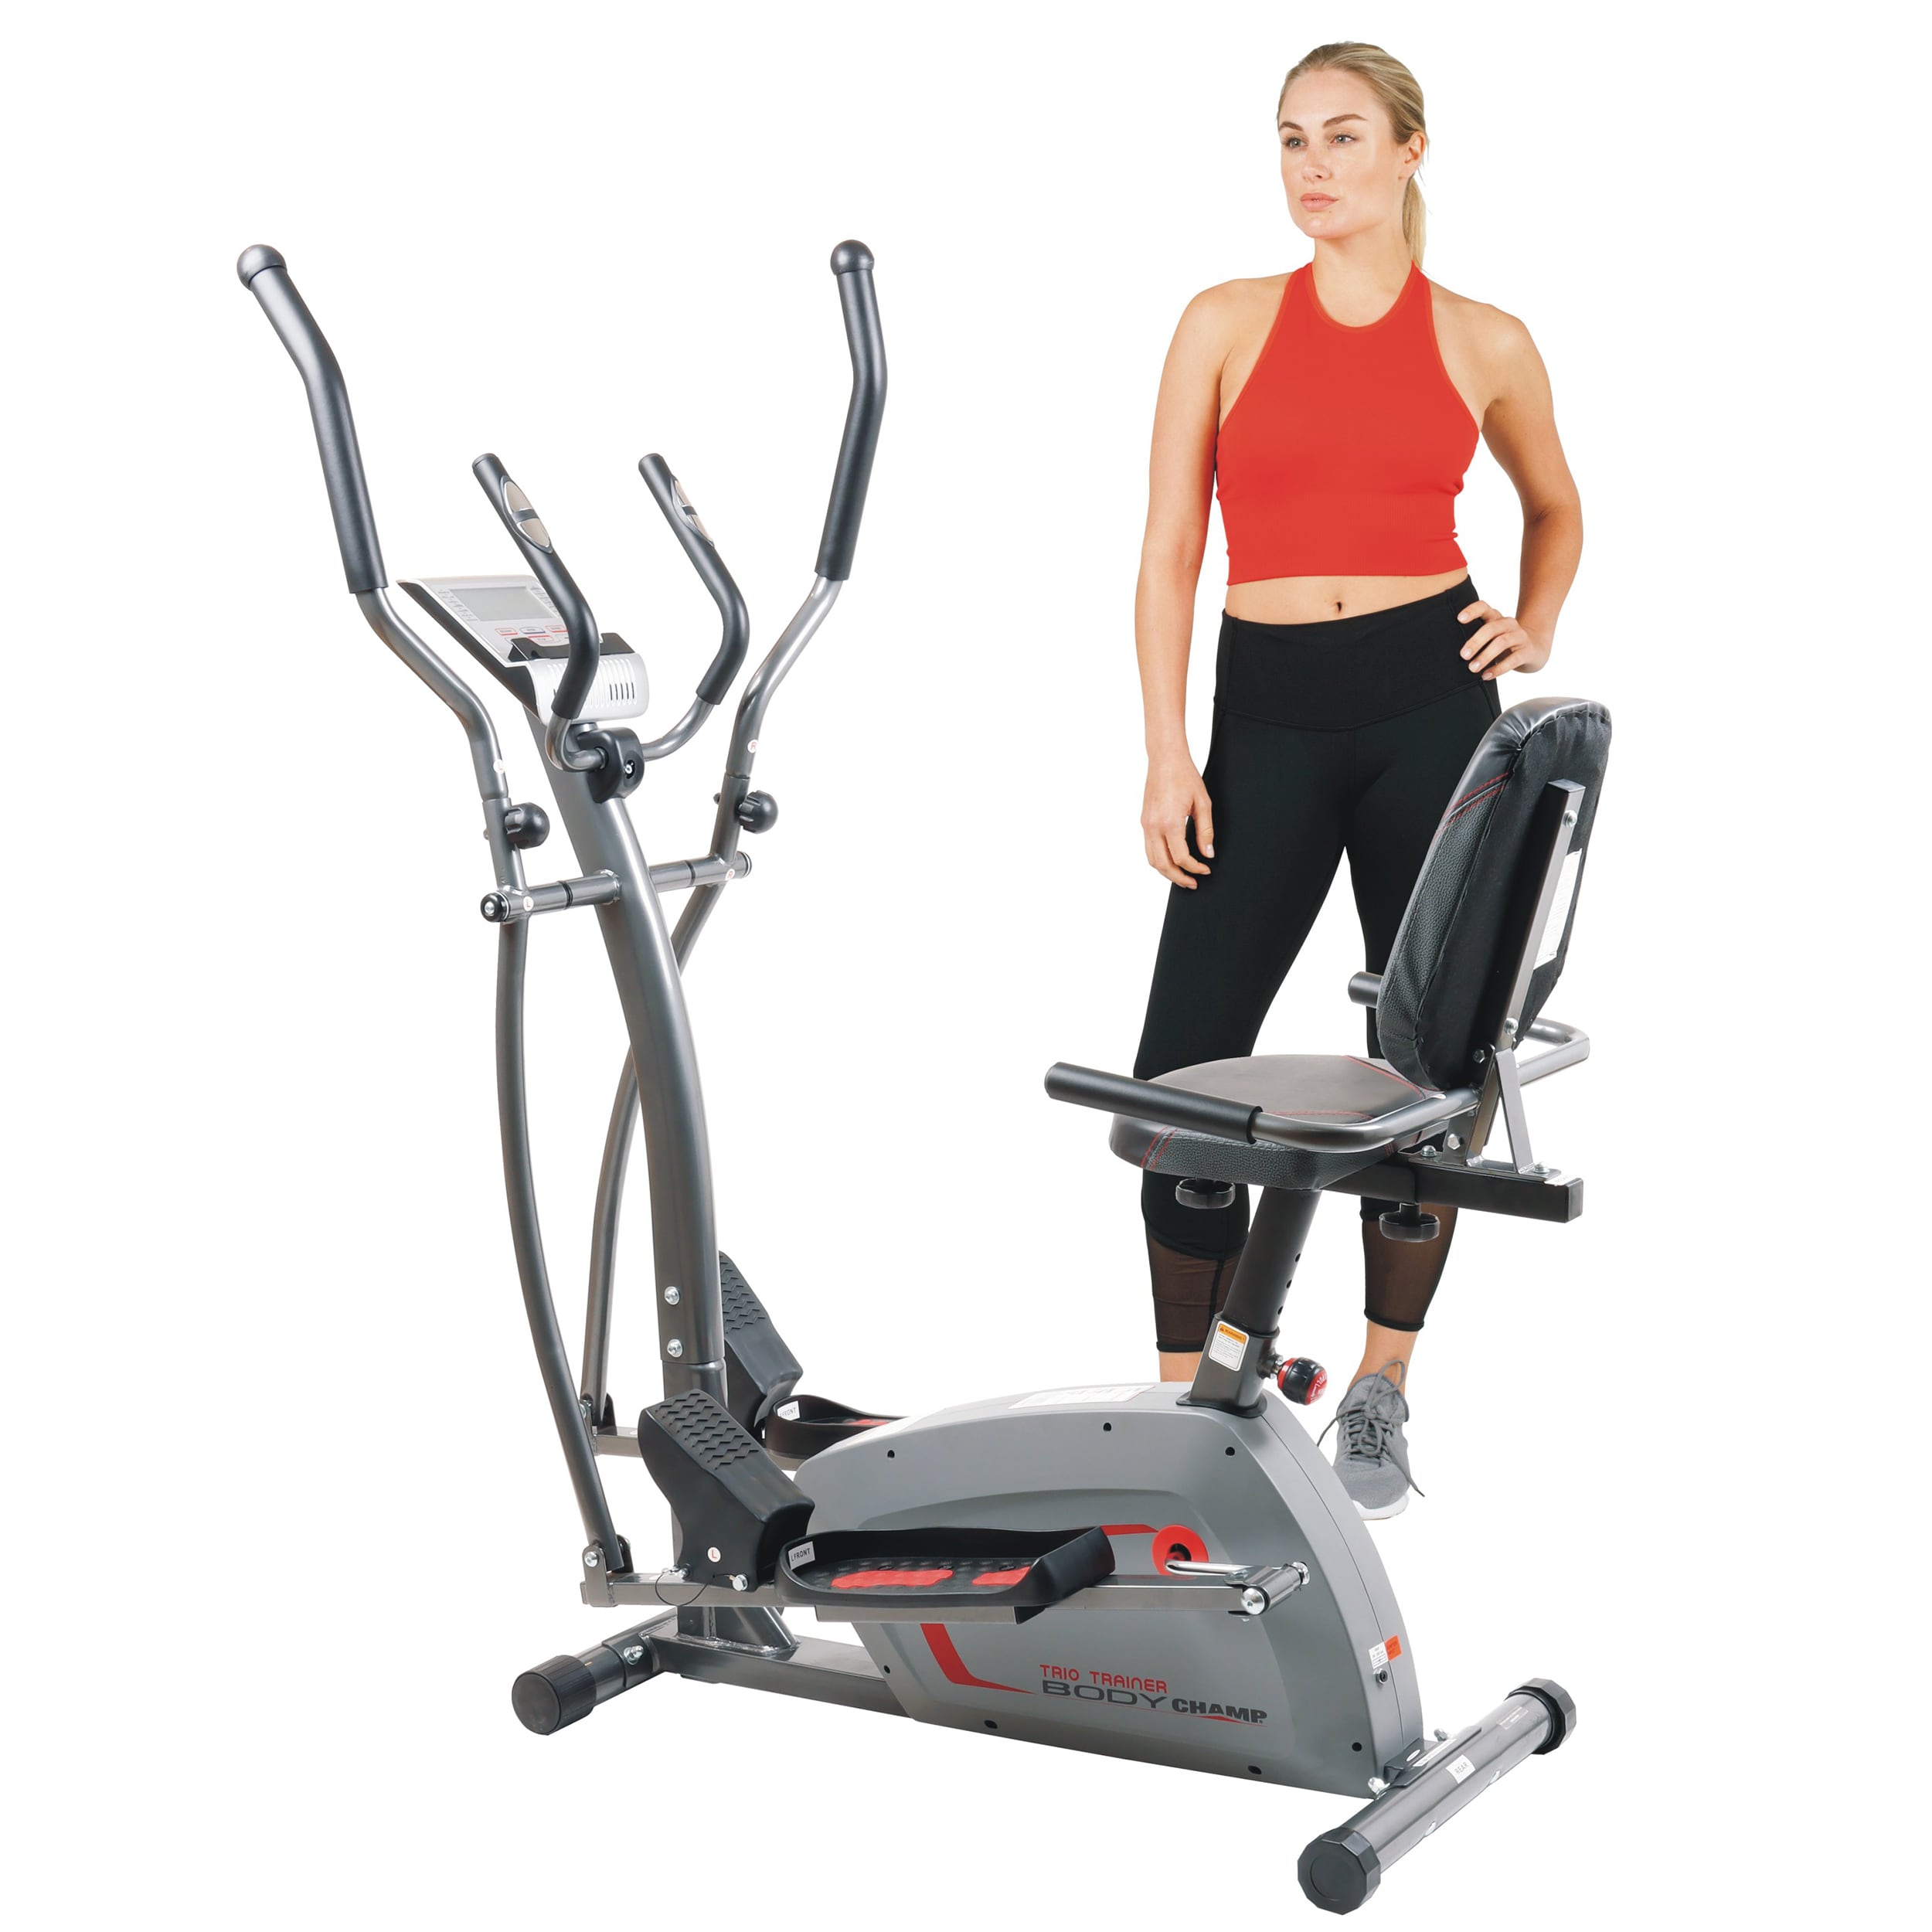 department Magnetic Exercise Exercise at the Sports Recumbent Flex Bikes Cycle in Trio-Trainer Body Bike